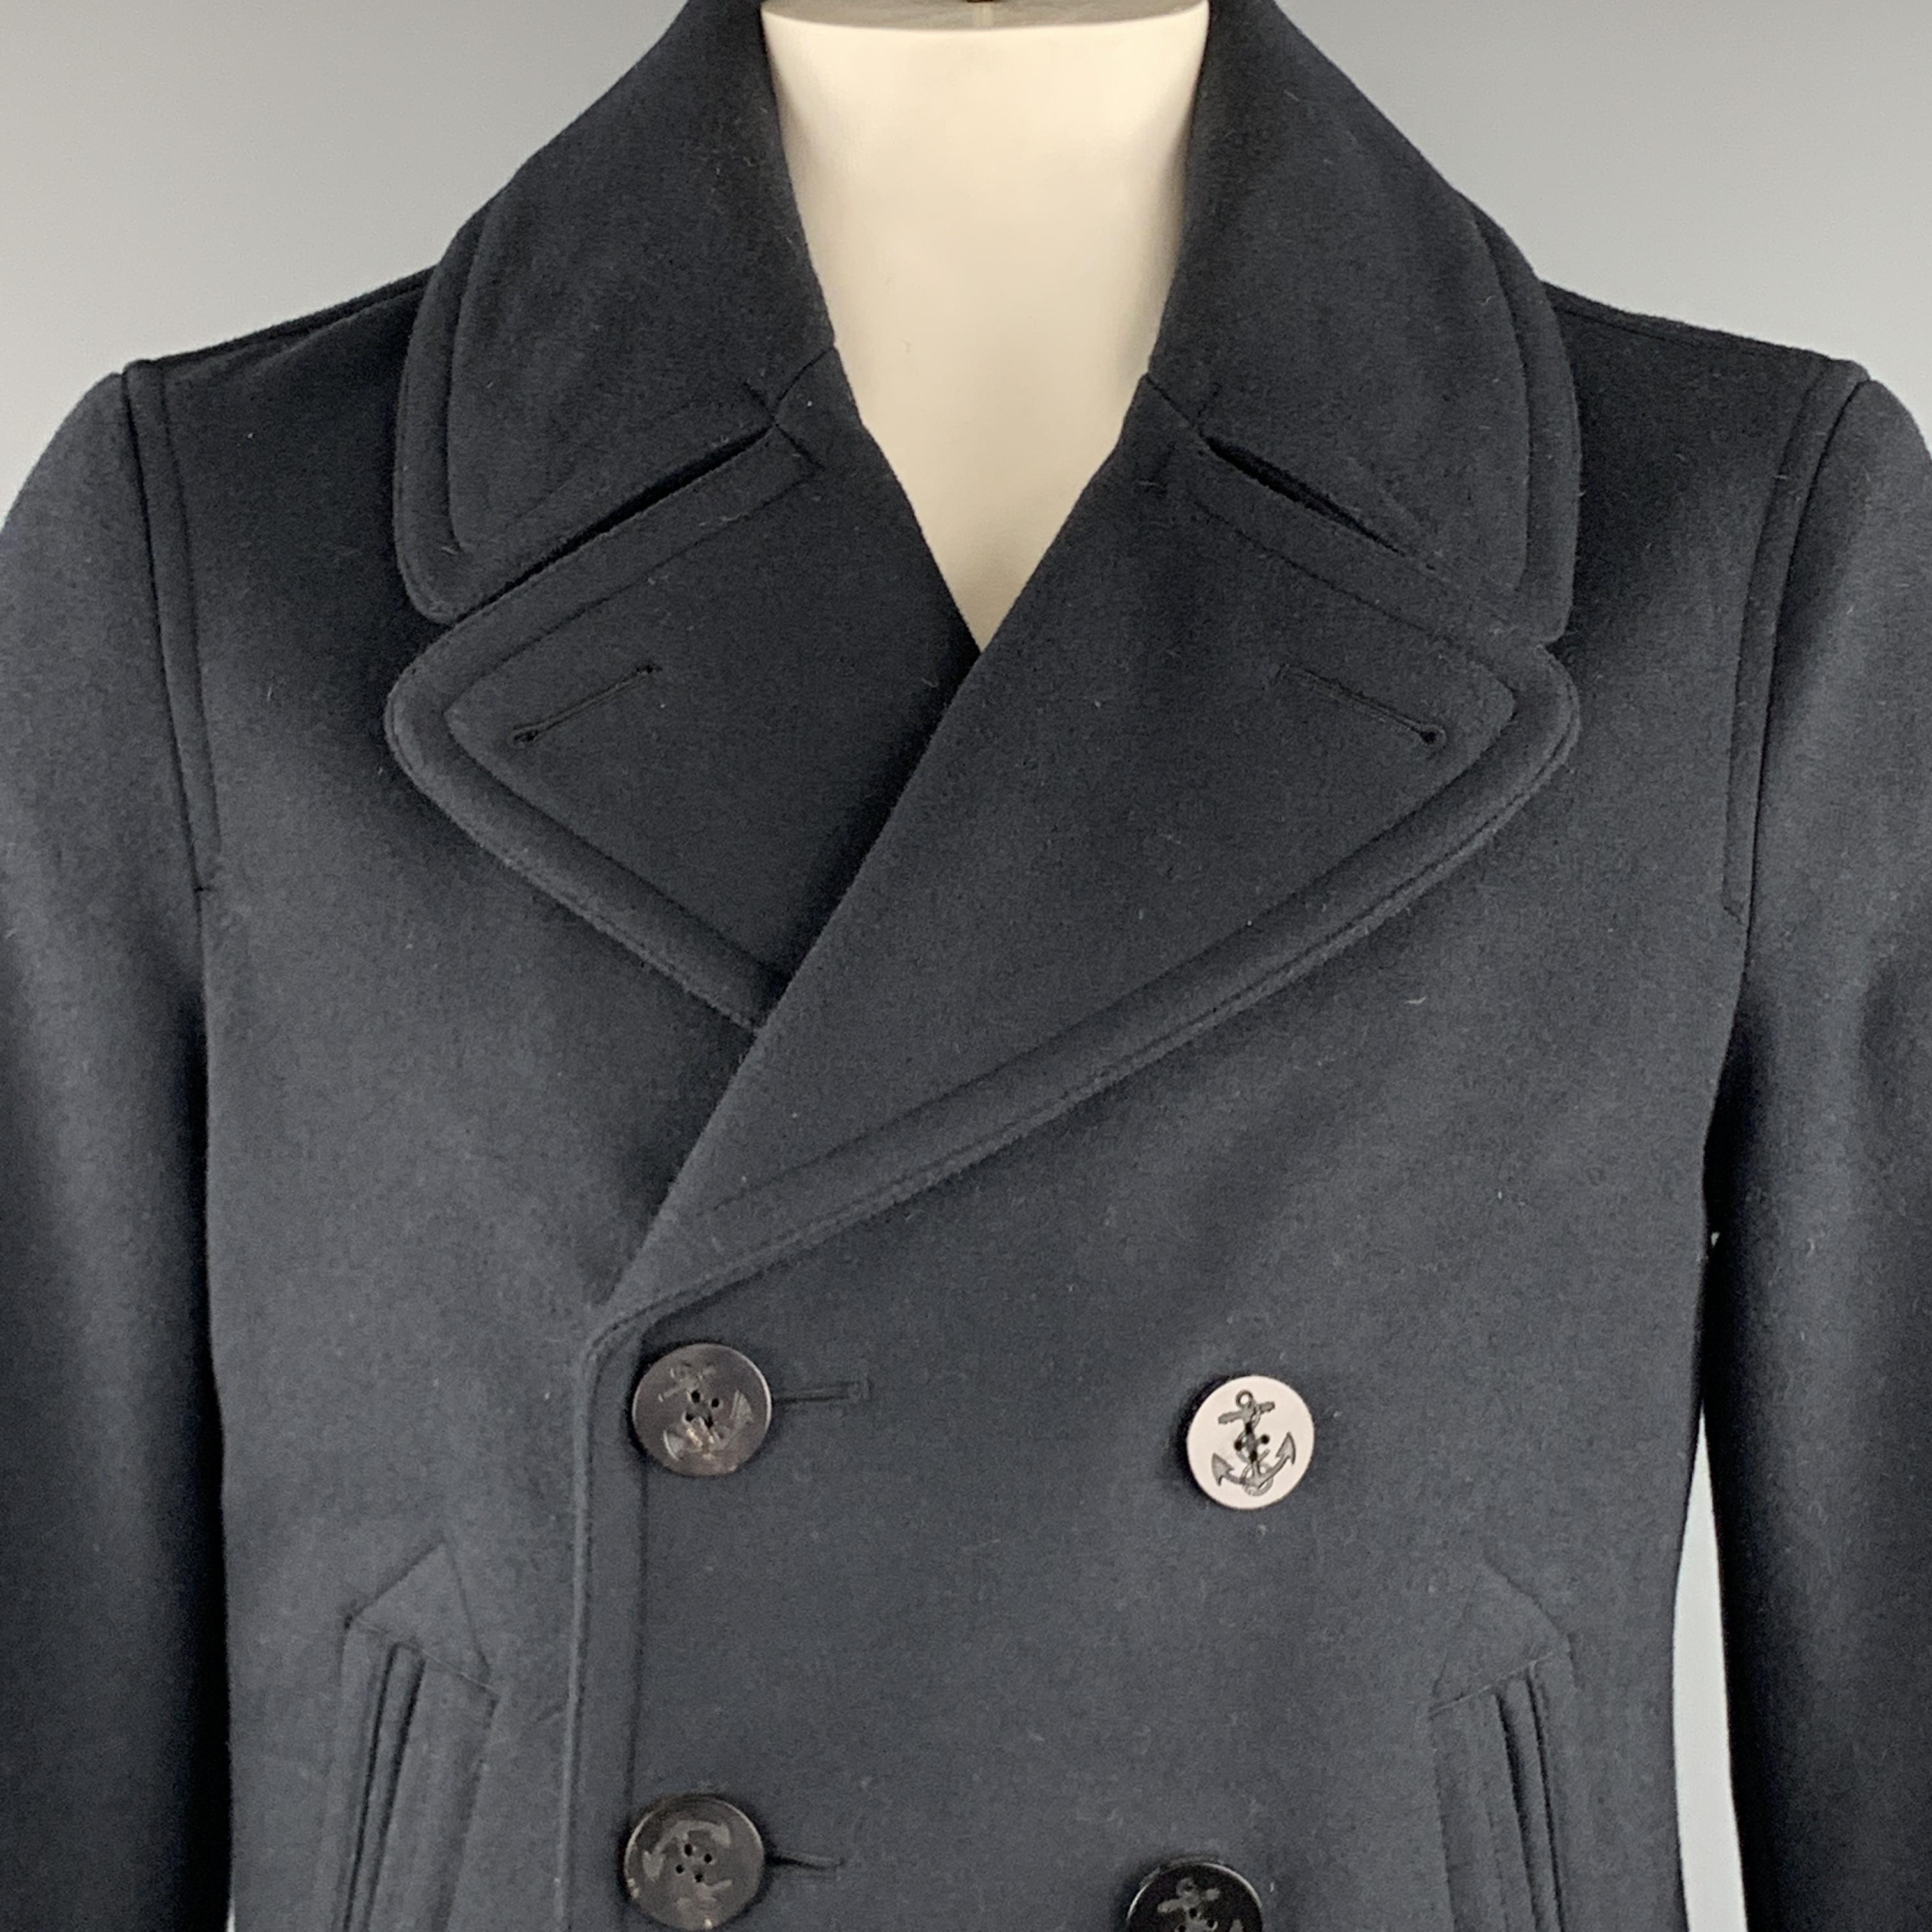 BURBERRY BRIT pea coat comes in heavy navy wool cashmere blend felt with a pointed lapel, slanted pockets, and double breasted front with anchor buttons. 

Excellent Pre-Owned Condition.
Marked: L

Measurements:

Shoulder: 18 in.
Chest: 44